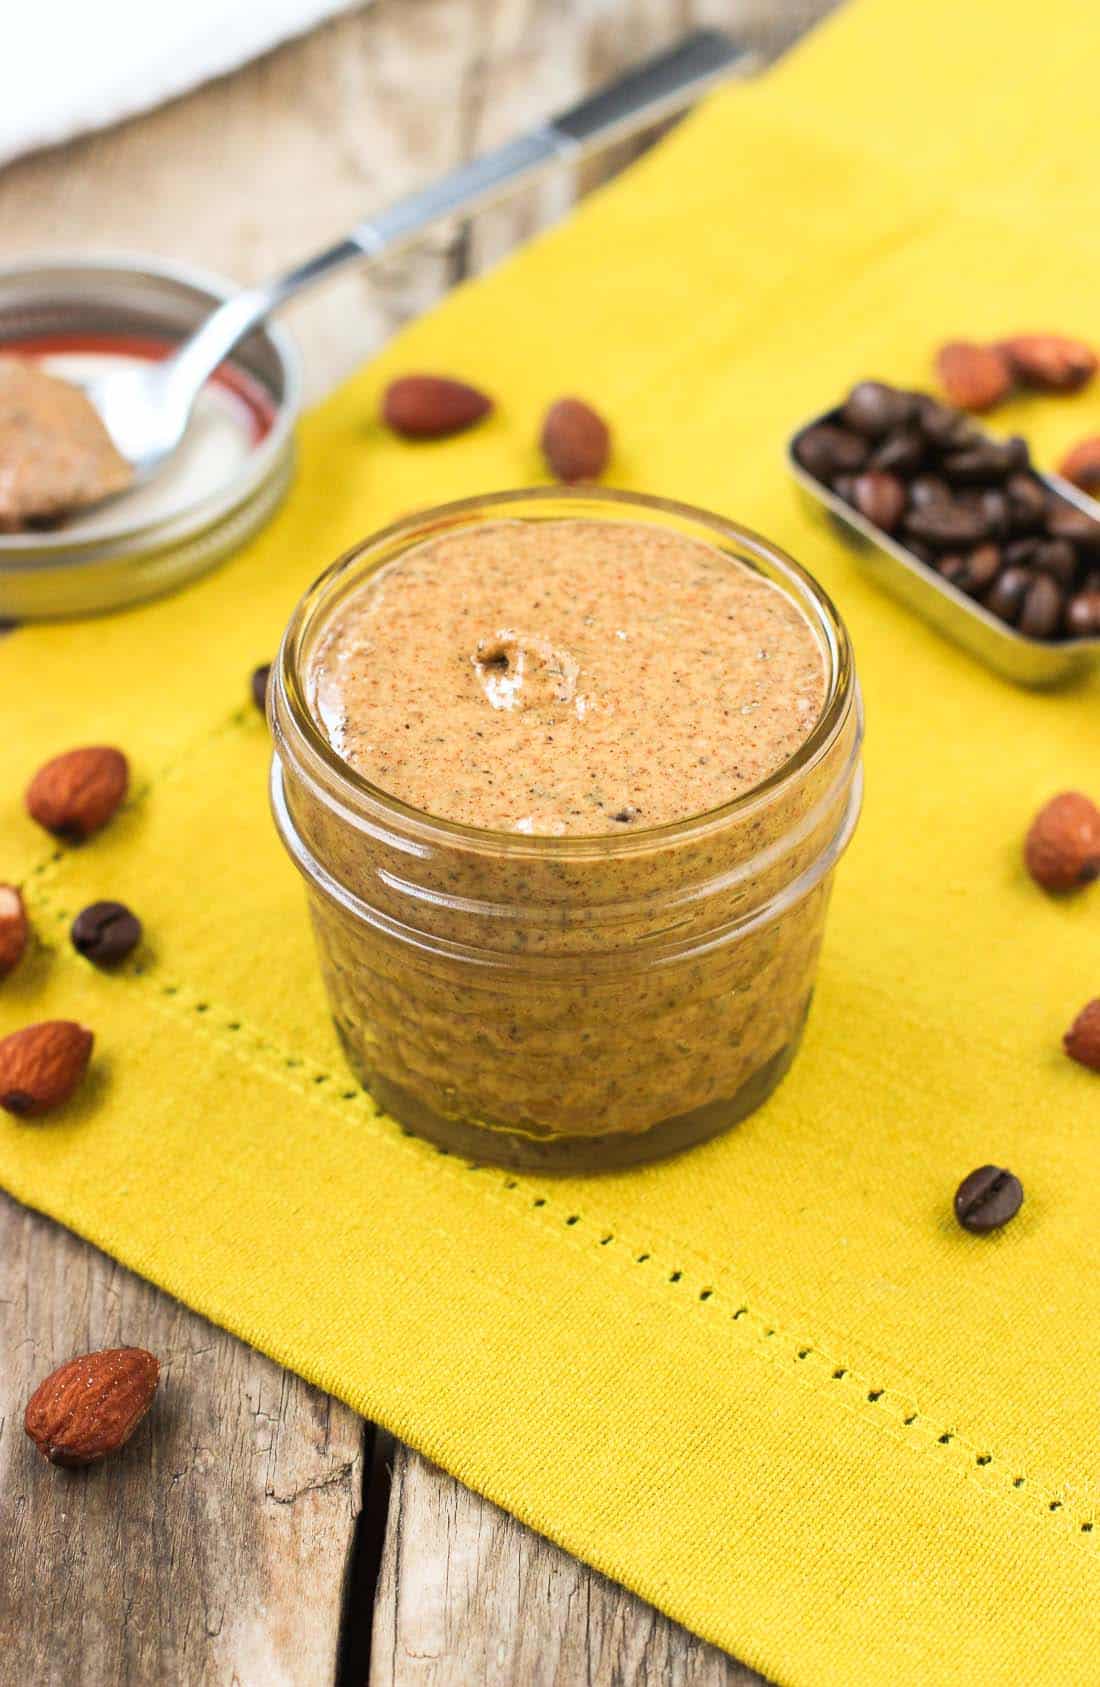 A small glass jar of almond butter on a dish towel surrounded by loose almonds and whole espresso beans